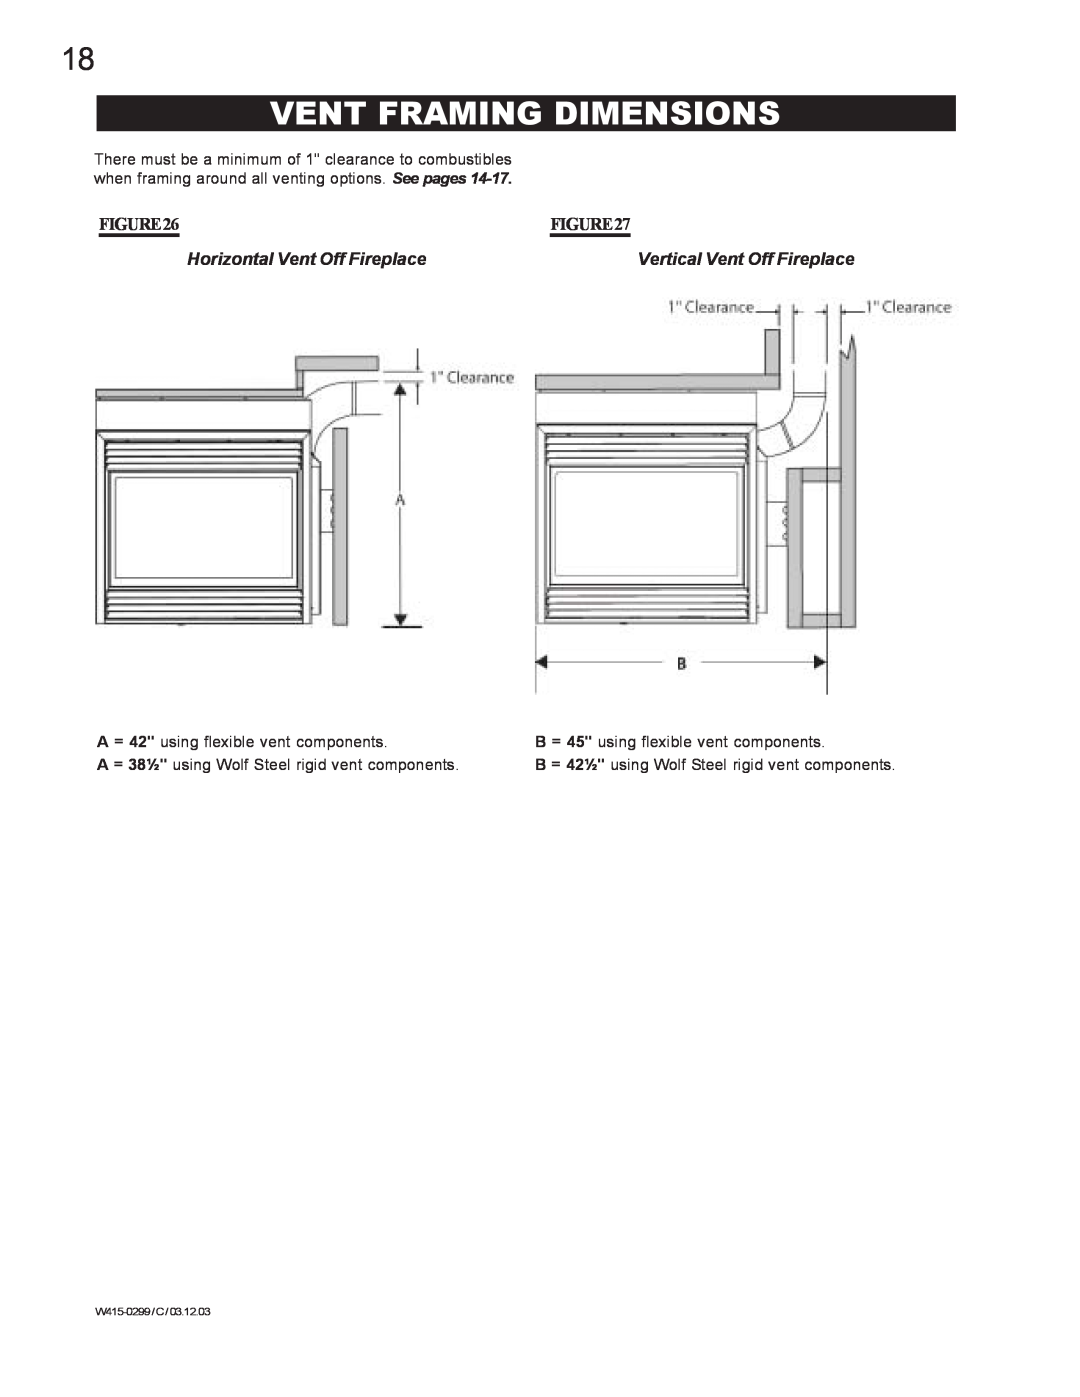 Napoleon Fireplaces BGD40-N, BGD40-P Vent Framing Dimensions, Horizontal Vent Off Fireplace, Vertical Vent Off Fireplace 